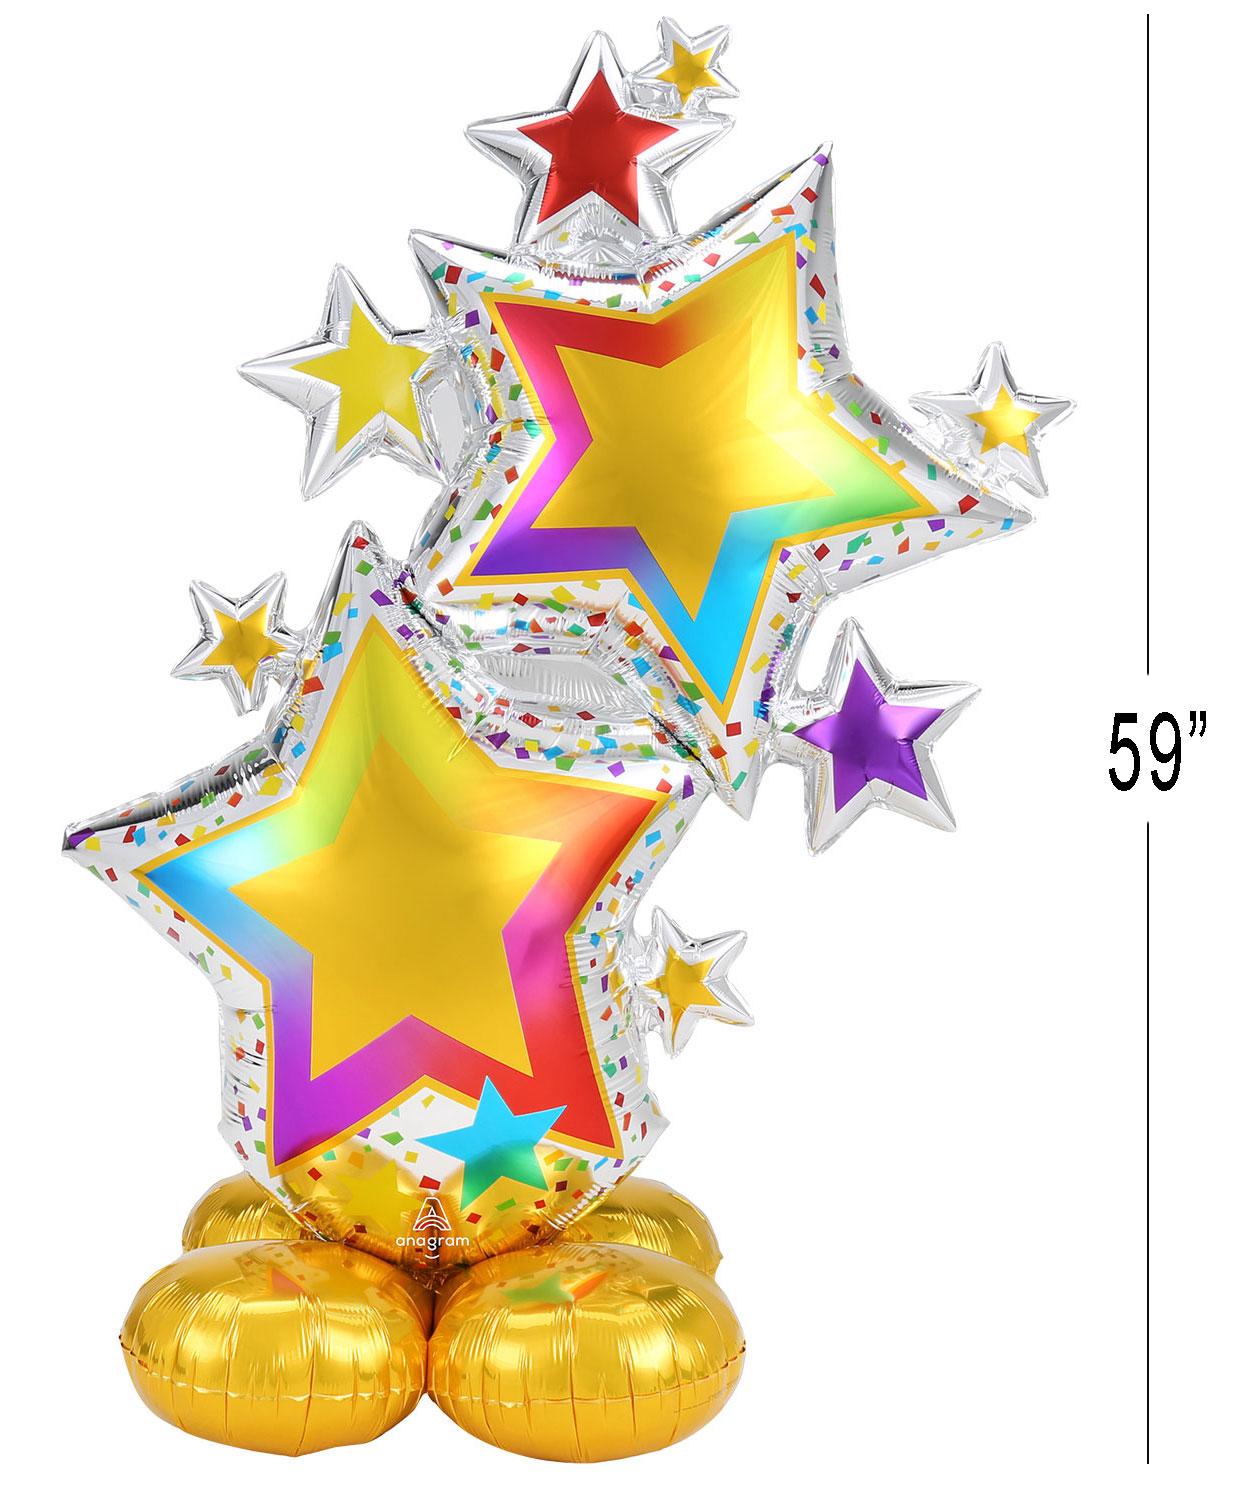 Airloonz Colourful Star Air-Filled Character Balloon by Amscan 4246411 available here at Karnival Costumes online partty shop